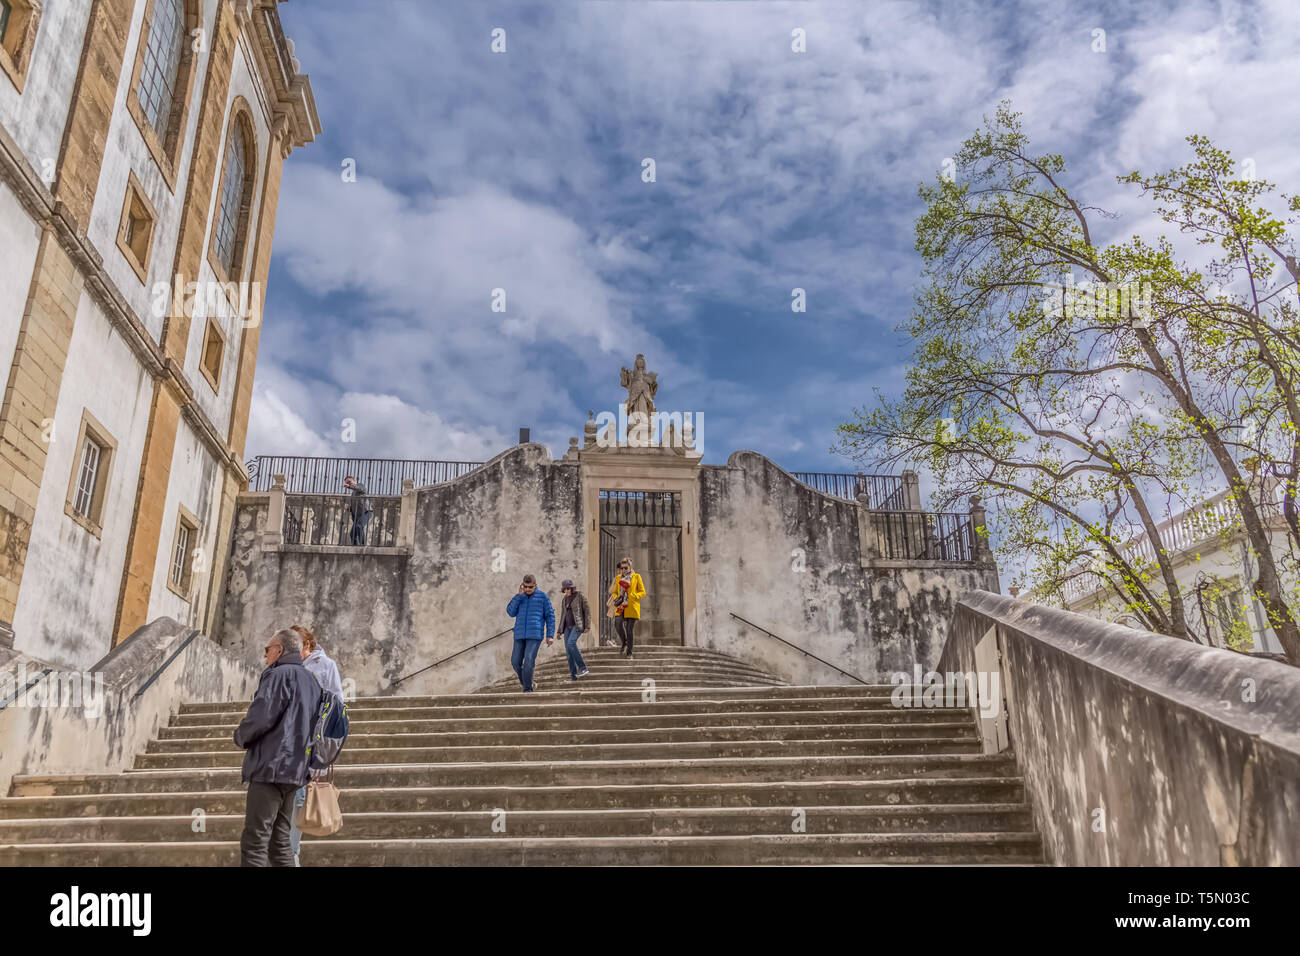 Coimbra / Portugal - 04 04 2019 : View of stairway of Minerva, gives access to the plaza of the University of Coimbra, people tourists in scene, in Co Stock Photo